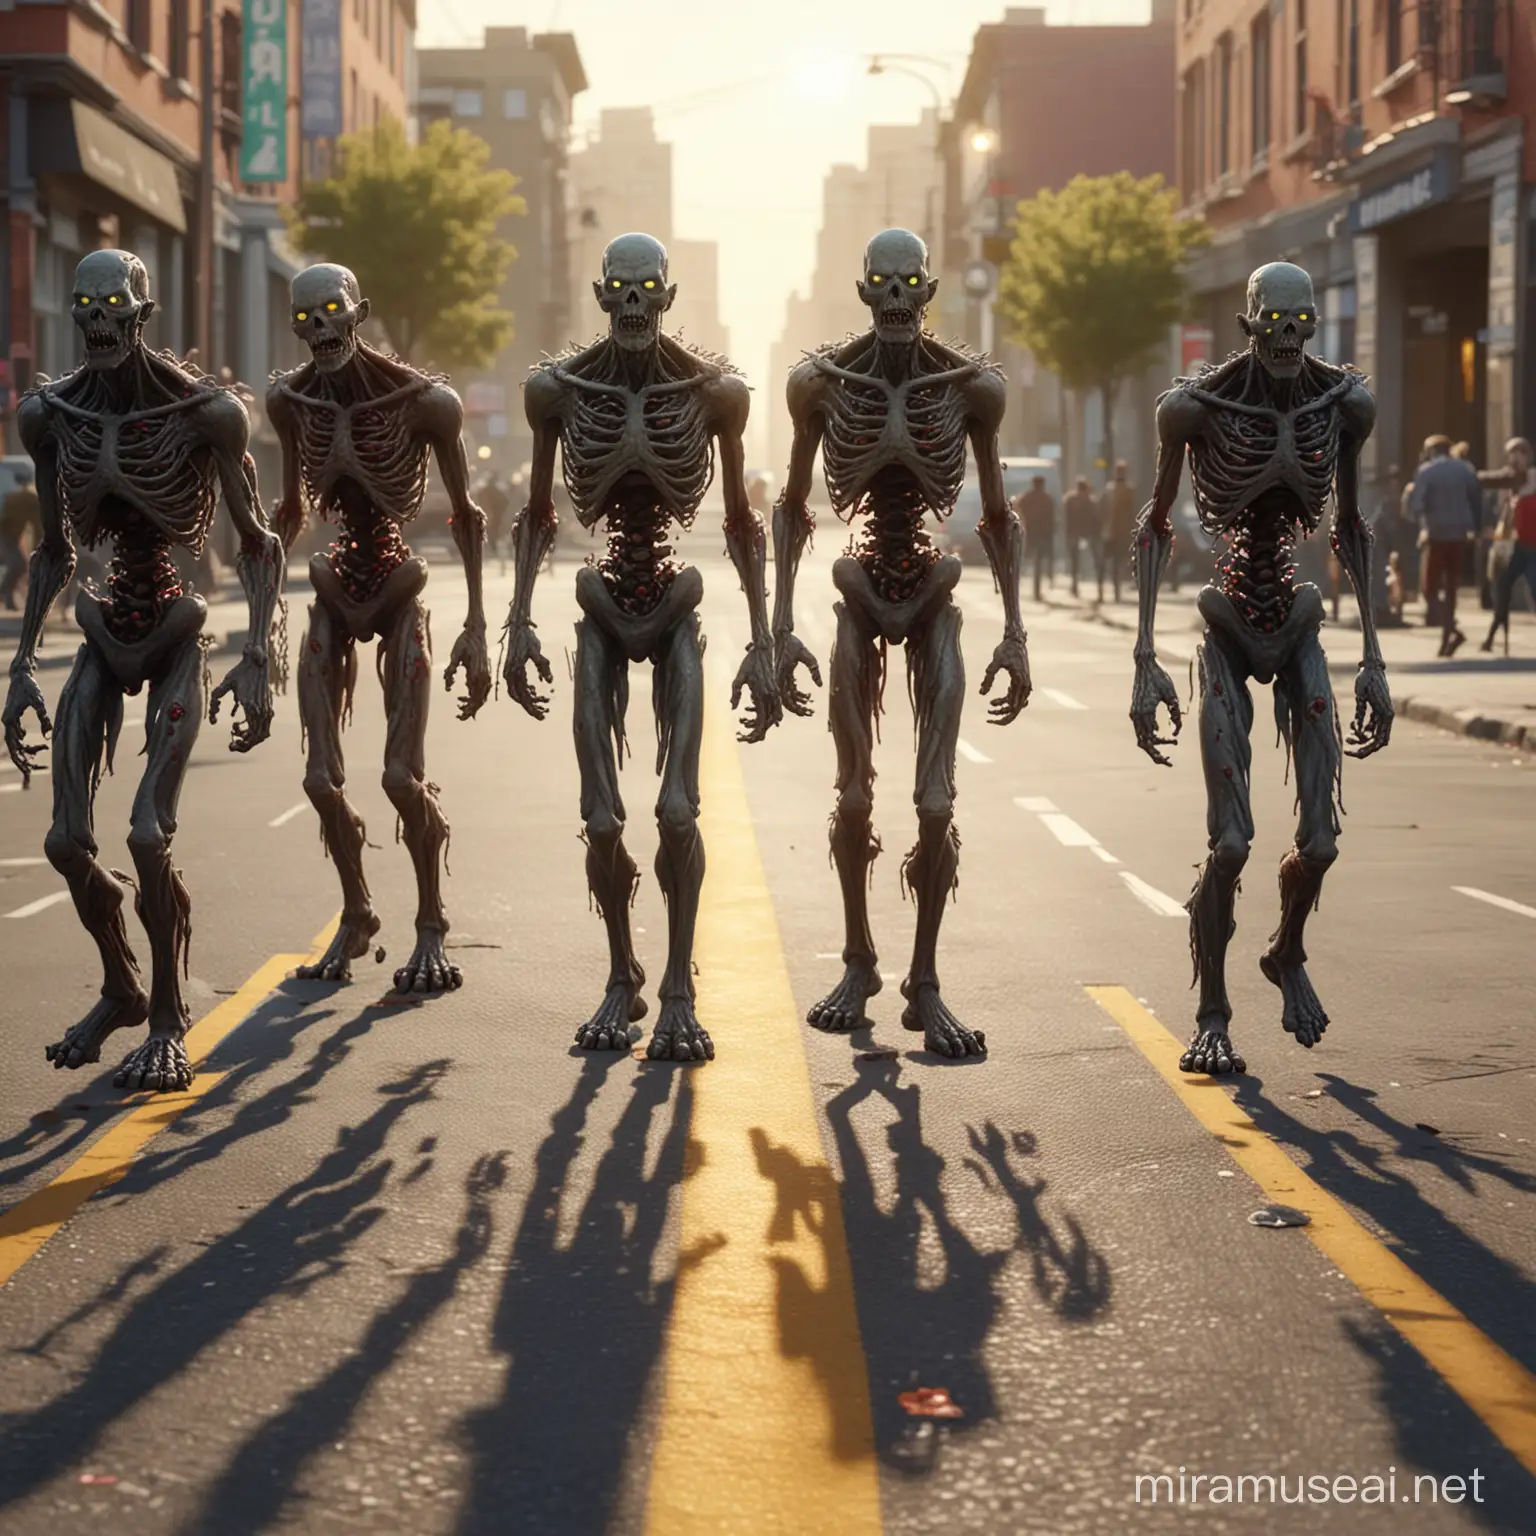 Dynamic Poses of Cartoon Style Zombies Crossing a Road